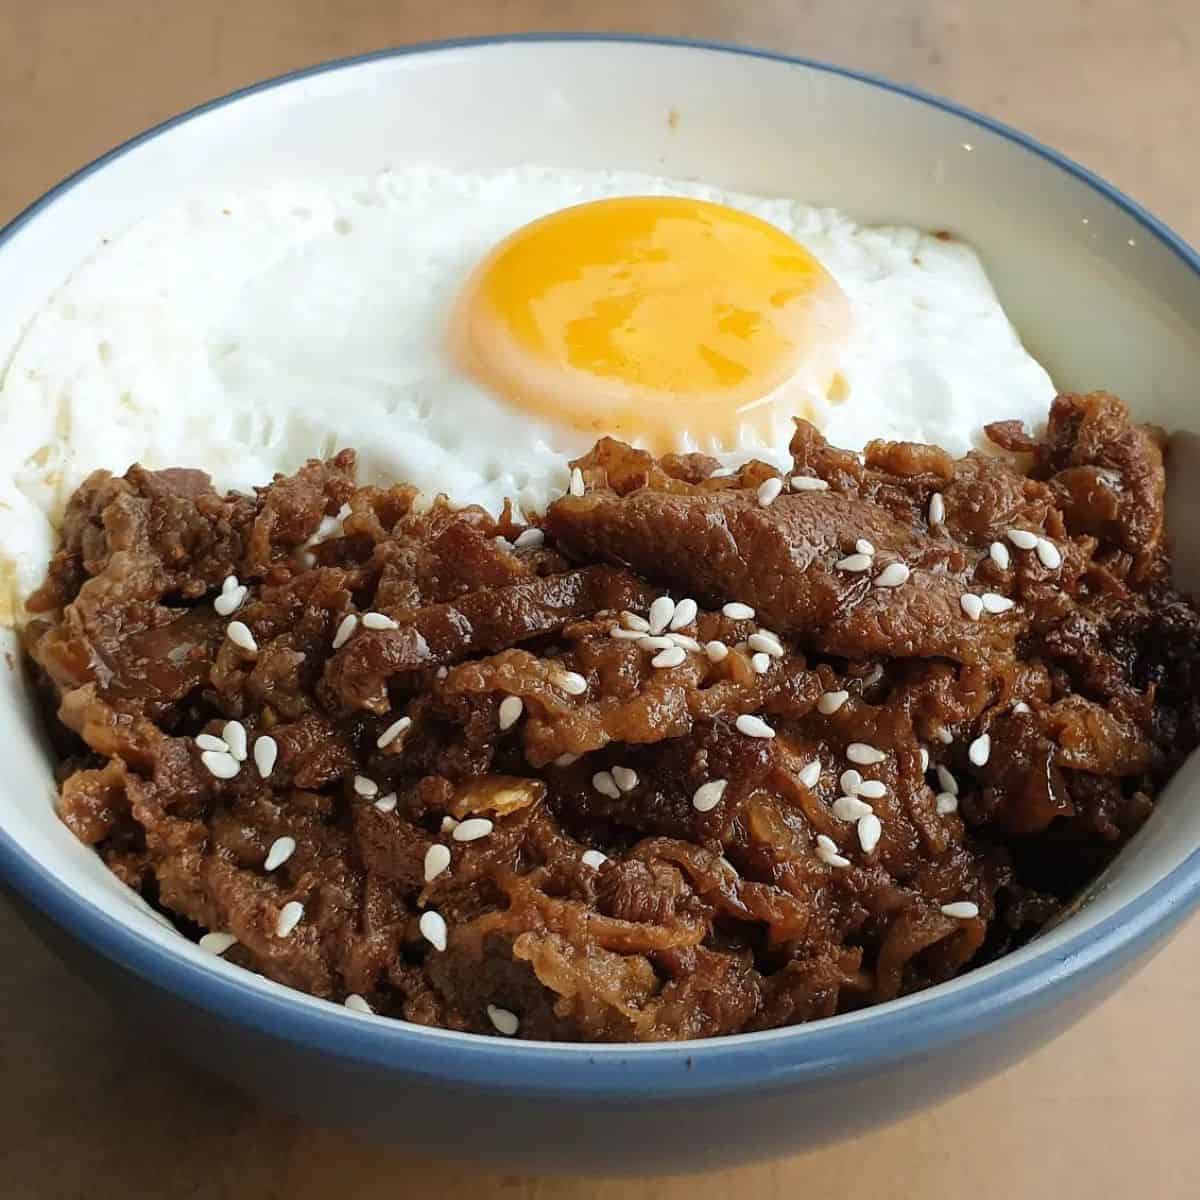 Beef Teriyaki sprinkled with sesame seeds and paired with a fried egg